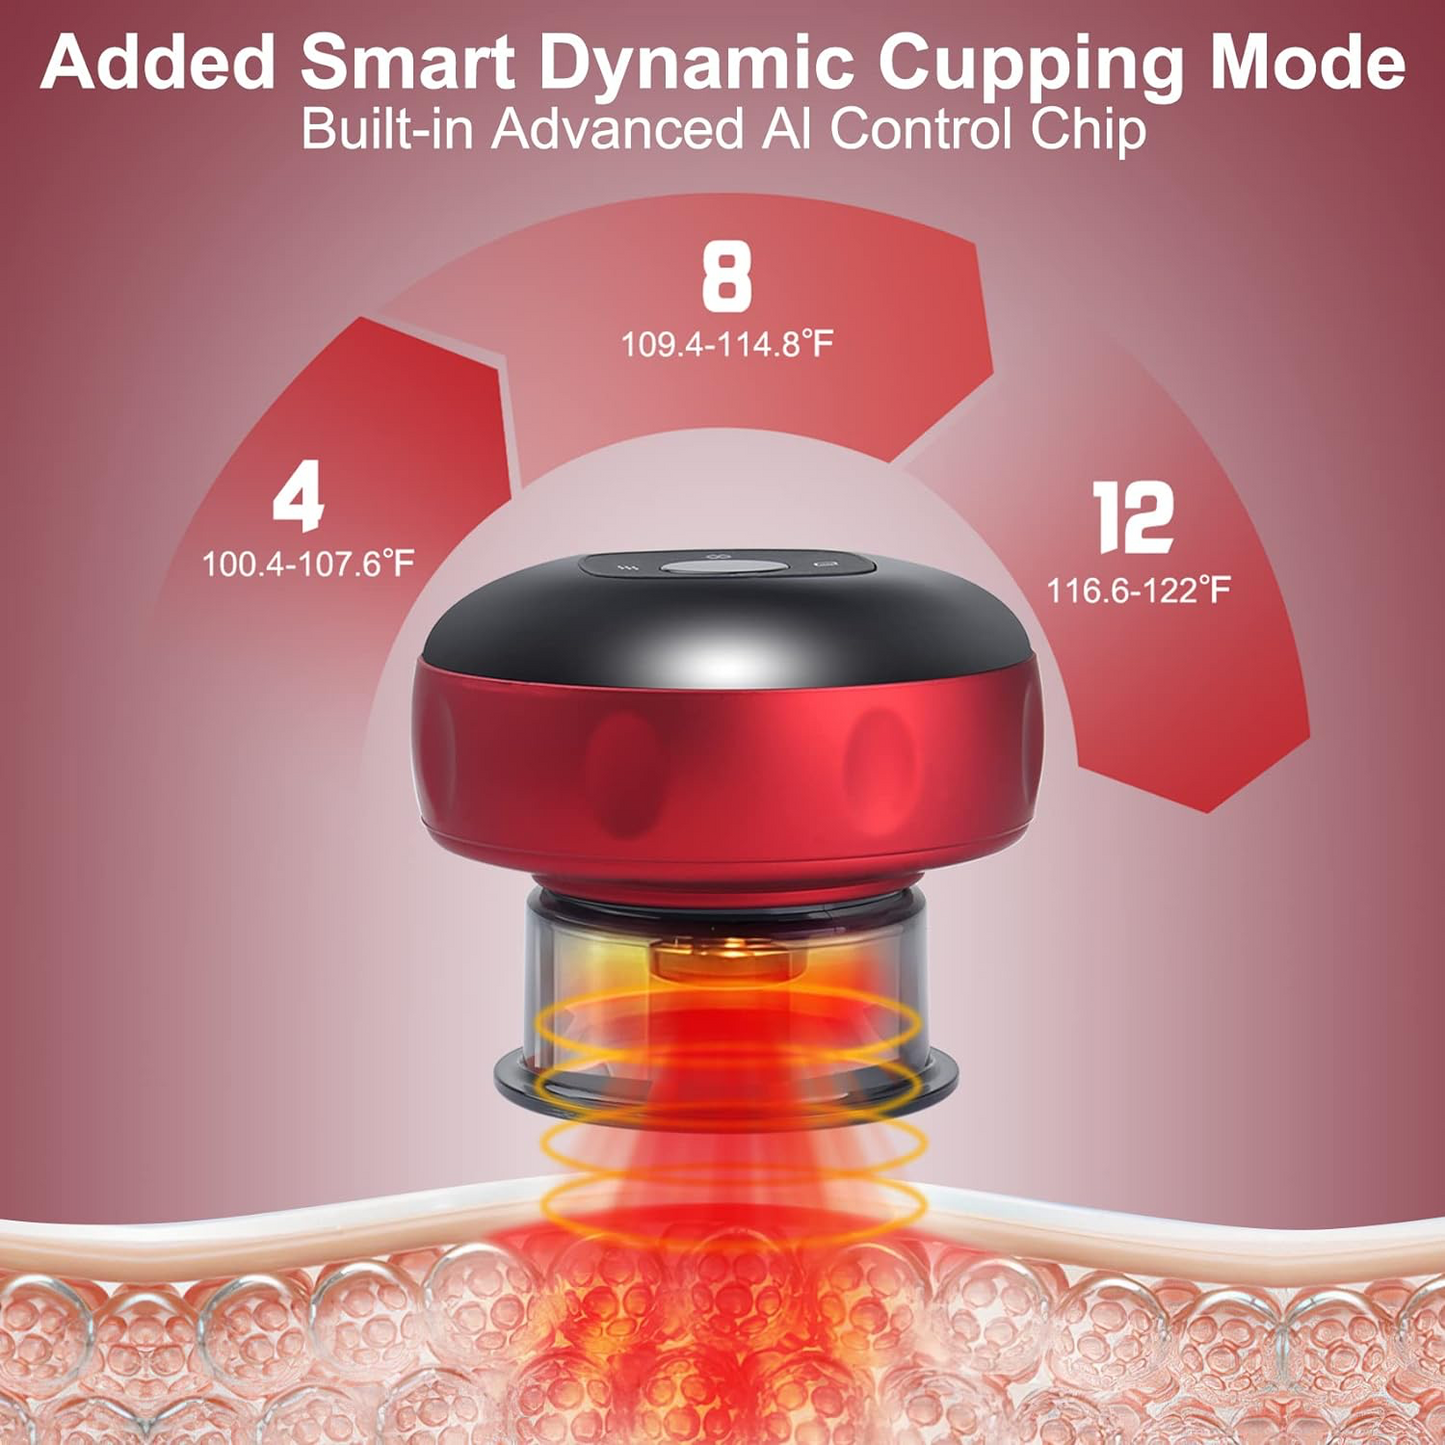 CuppingLife: Compact Cupping Therapy